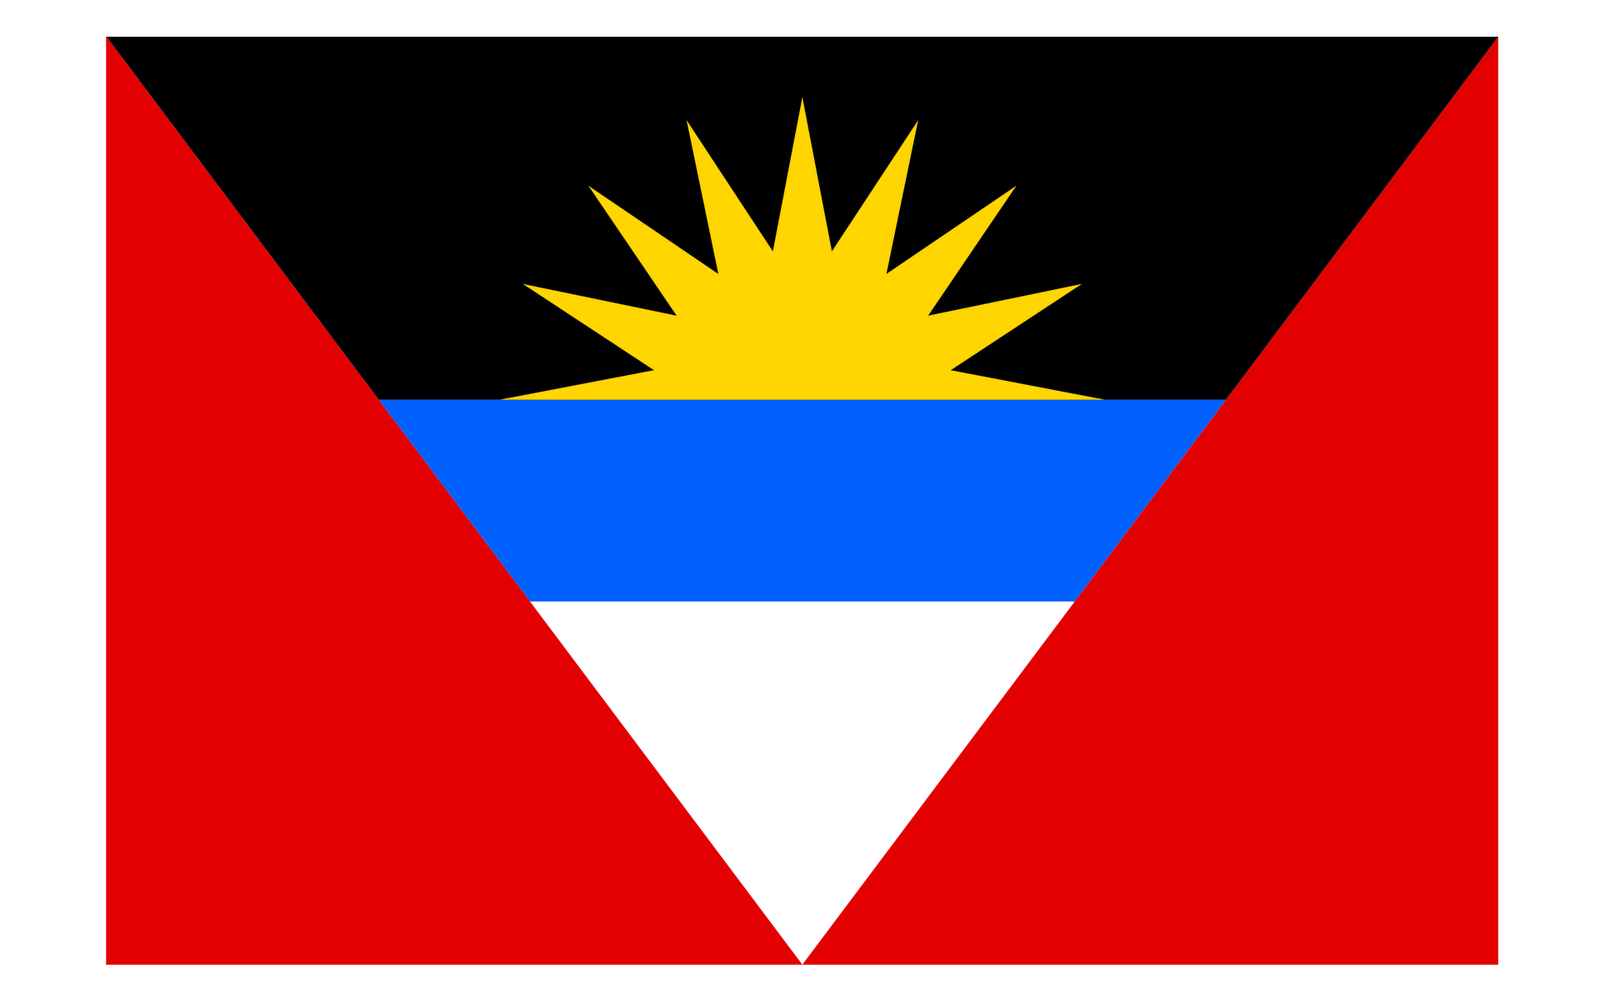 Free Download World Flags Antigua And Barbuda Flag Hd Wallpaper [1600x1000] For Your Desktop